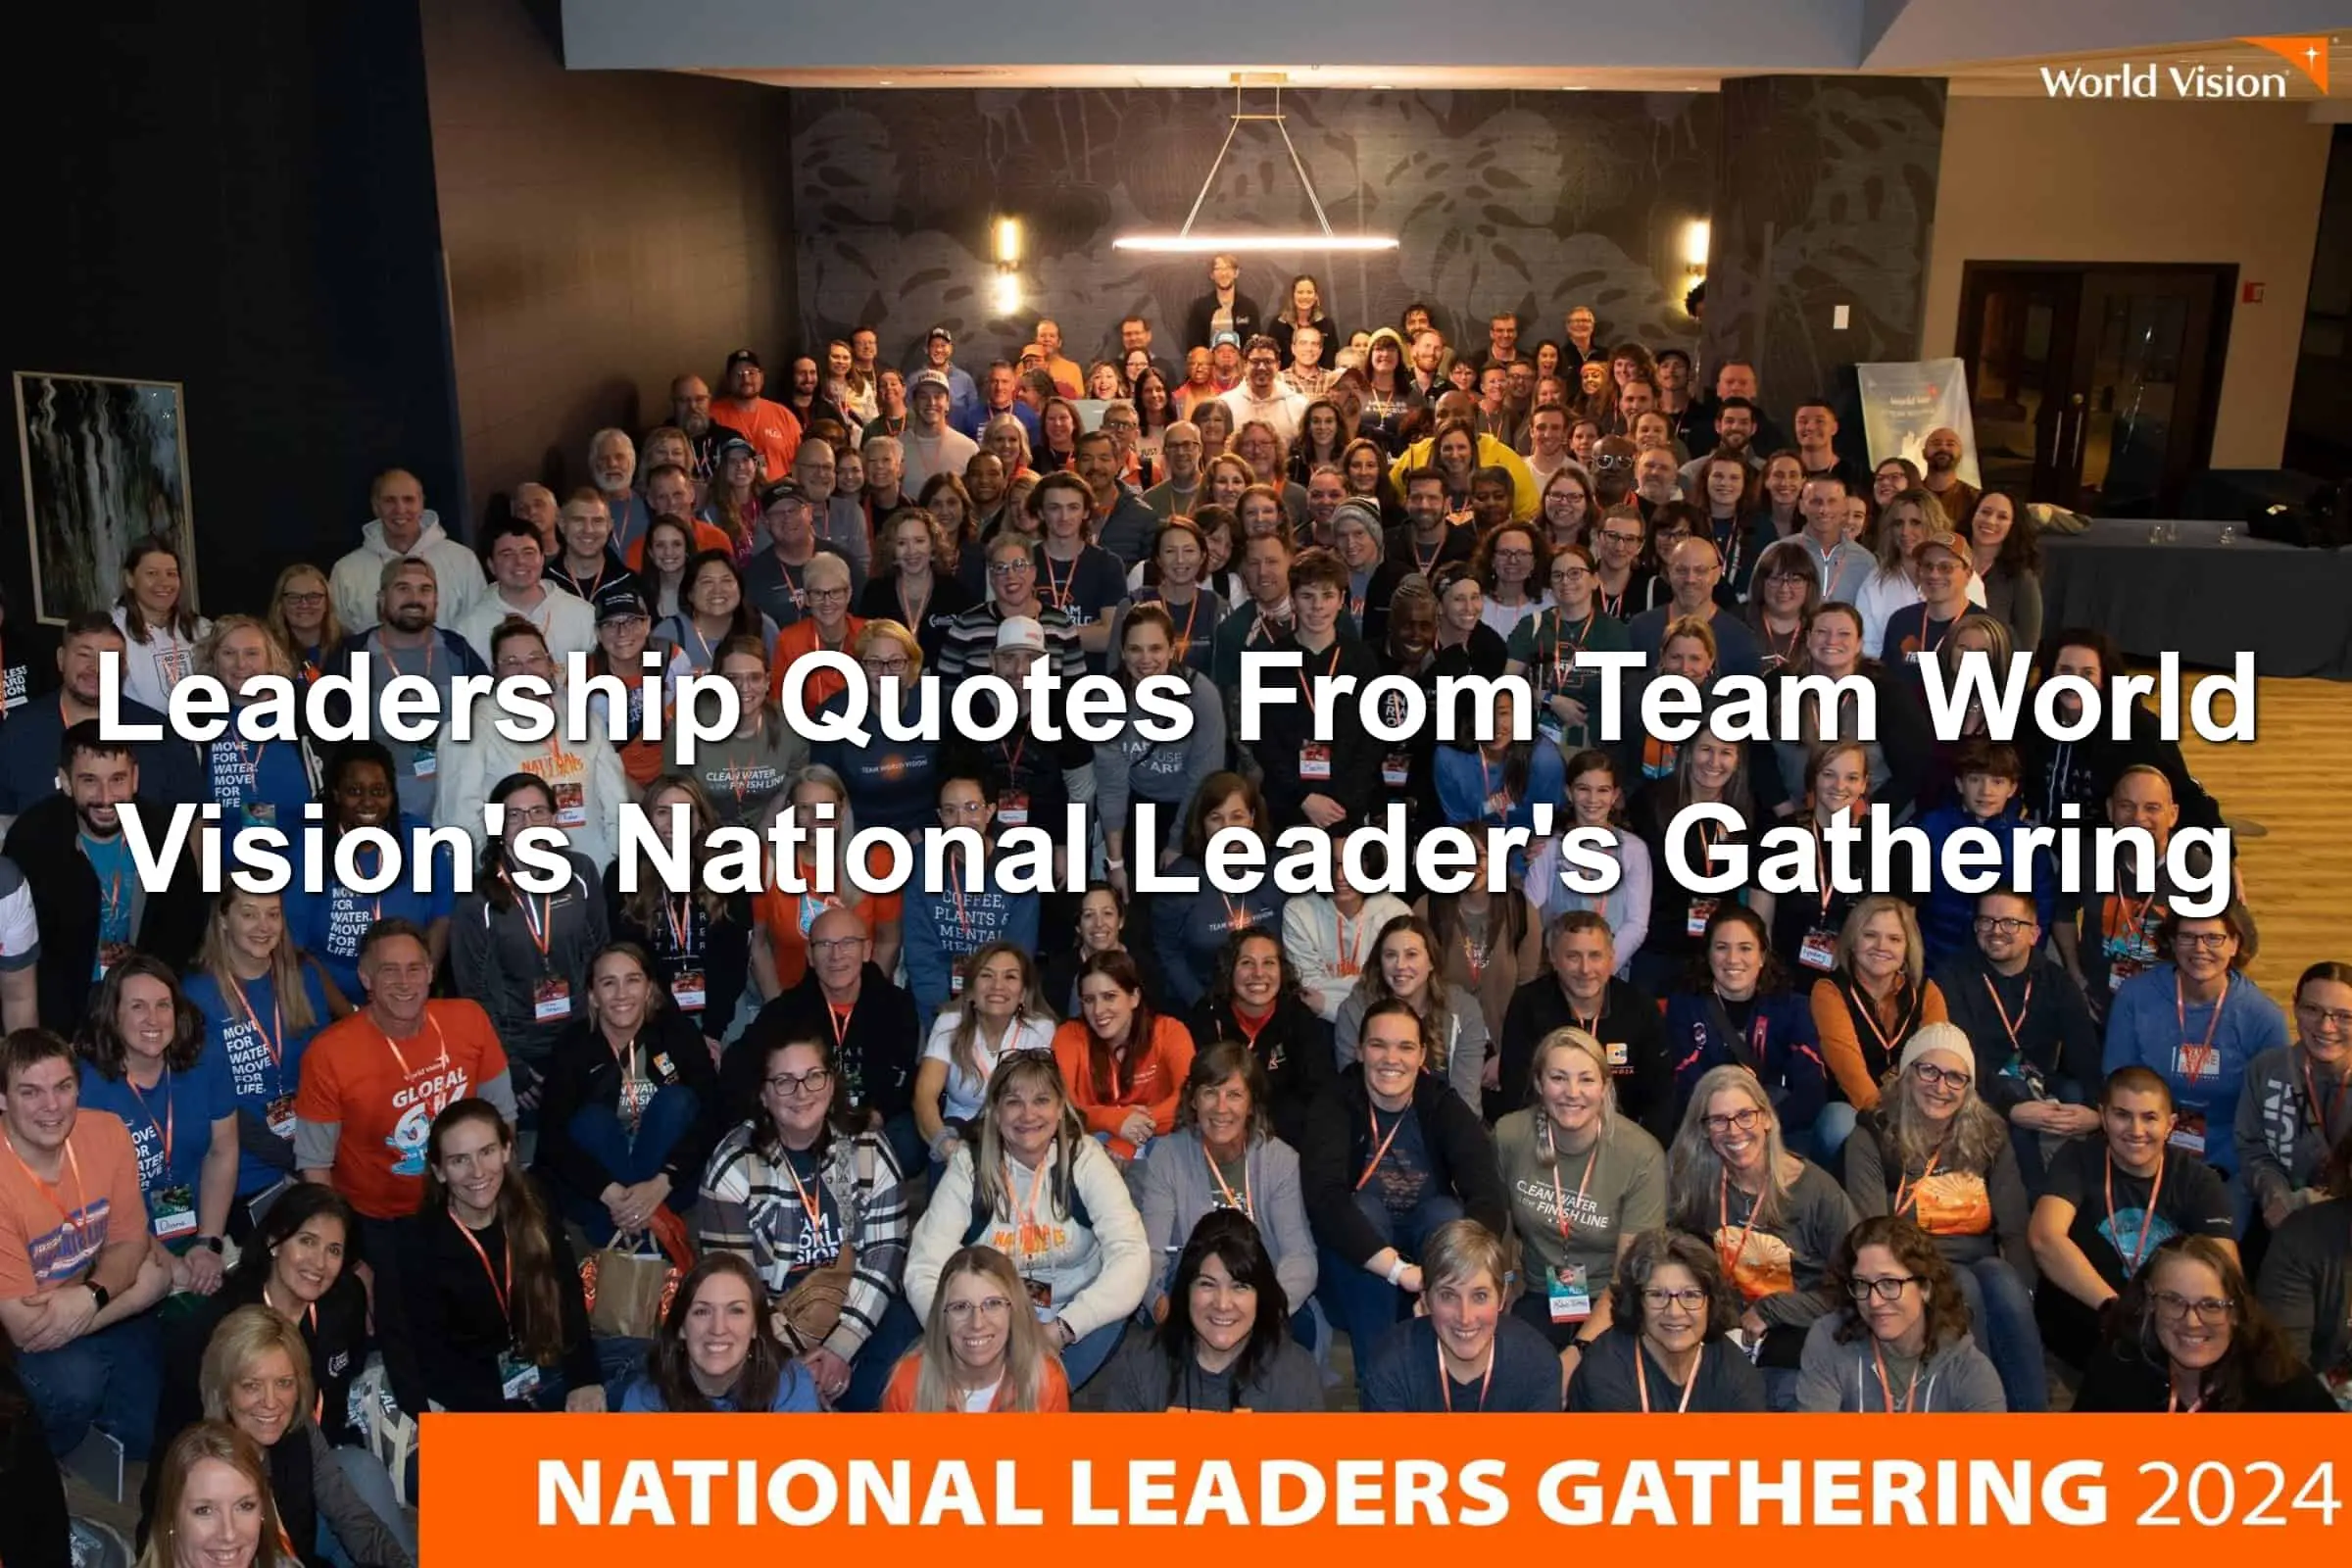 Group photo of people at the Team World Vision National Leader's Gathering 2024. Many in bright orange shirts.